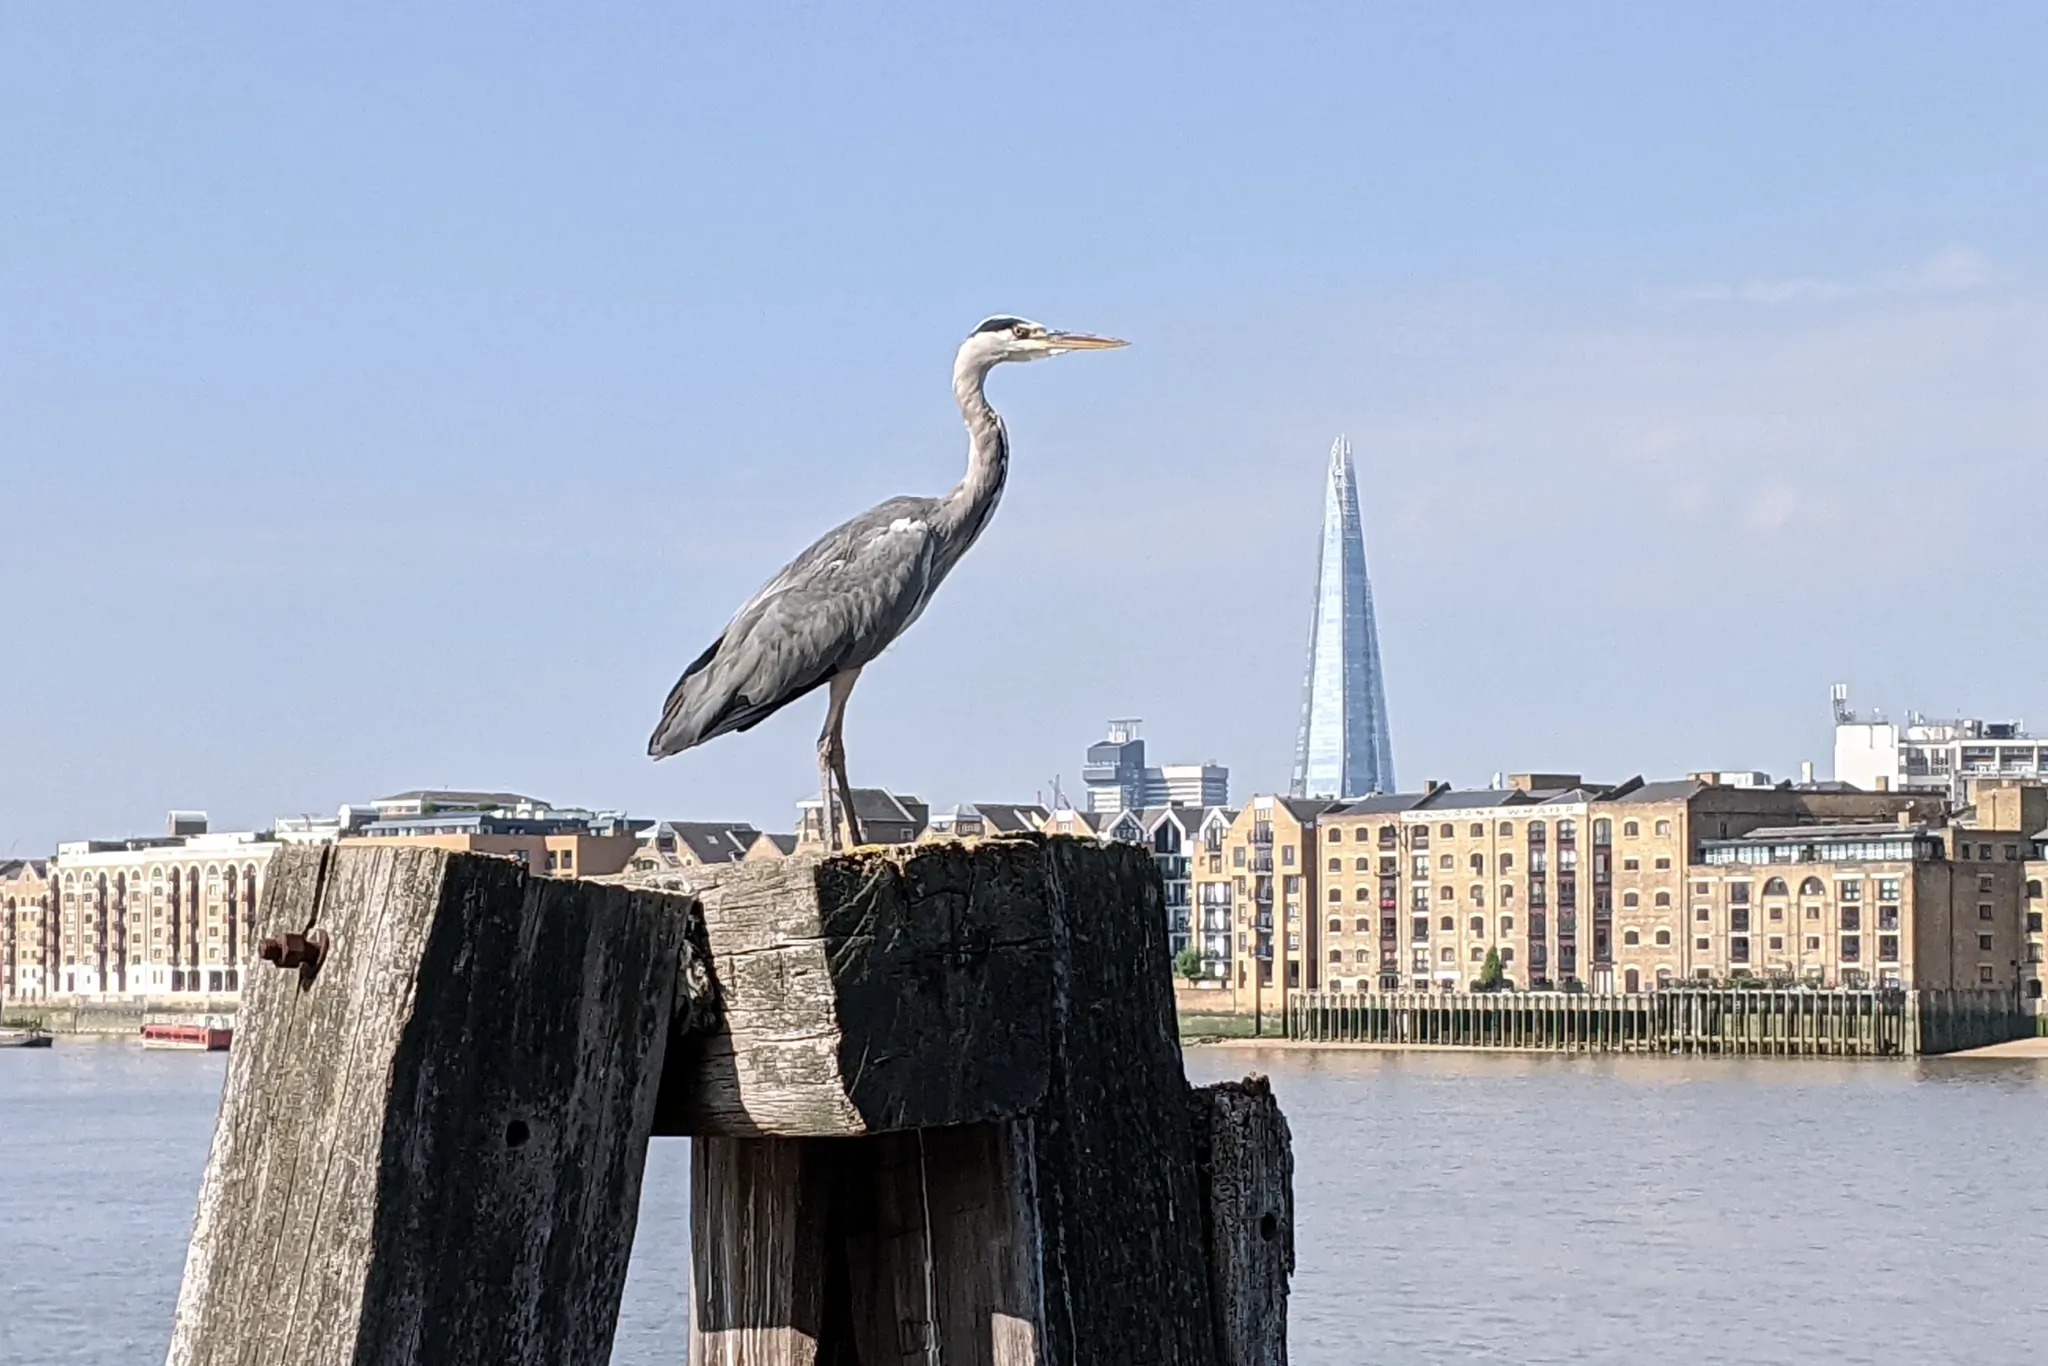 A heron standing on a wooden structure in the Thames. Behind it is the
river, the north bank, and the point of the Shard.